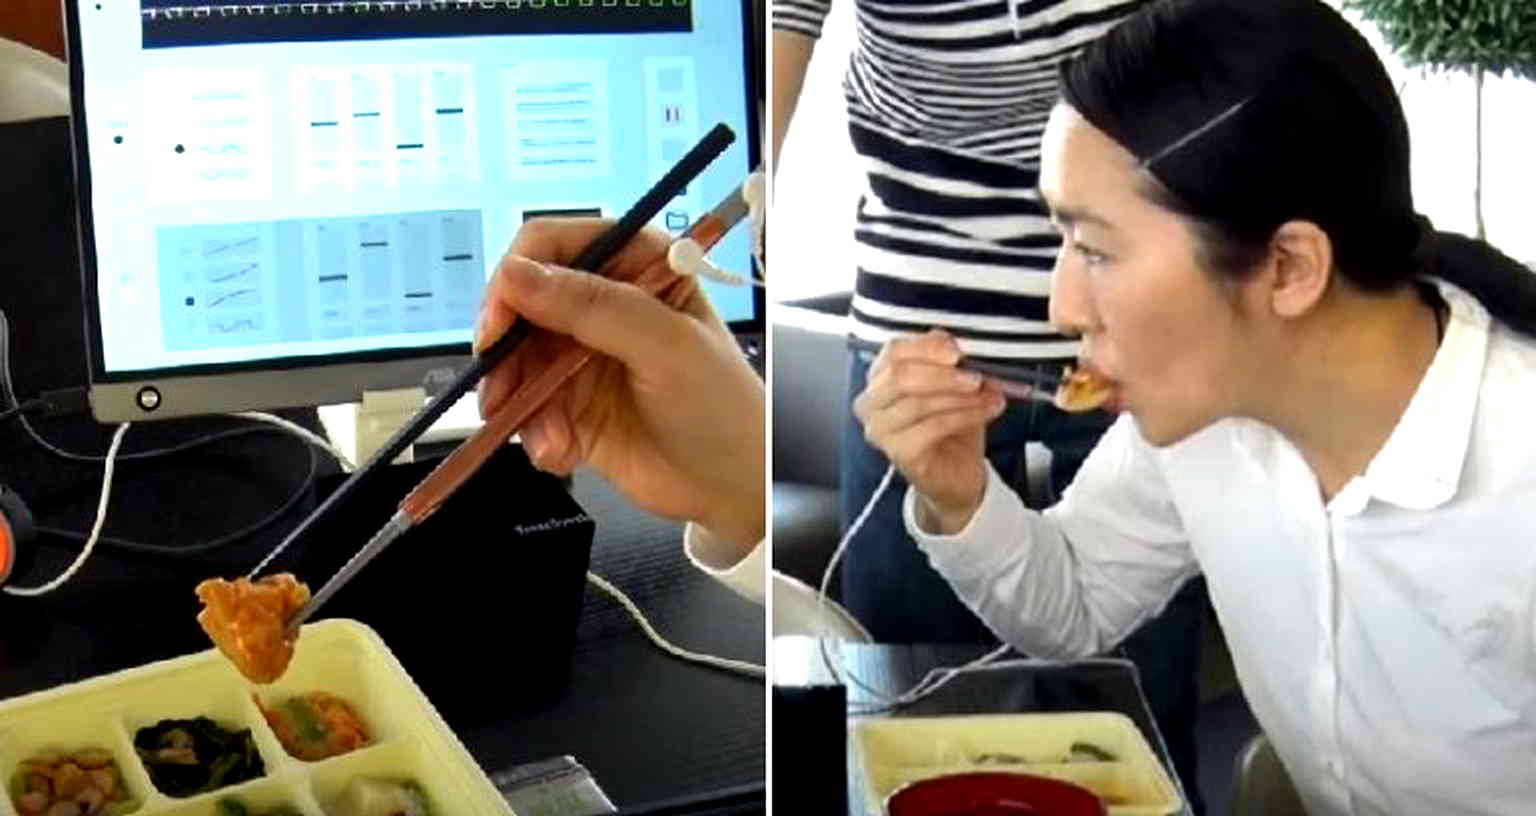 Electric chopsticks from Japan can enhance saltiness and umami flavor in food